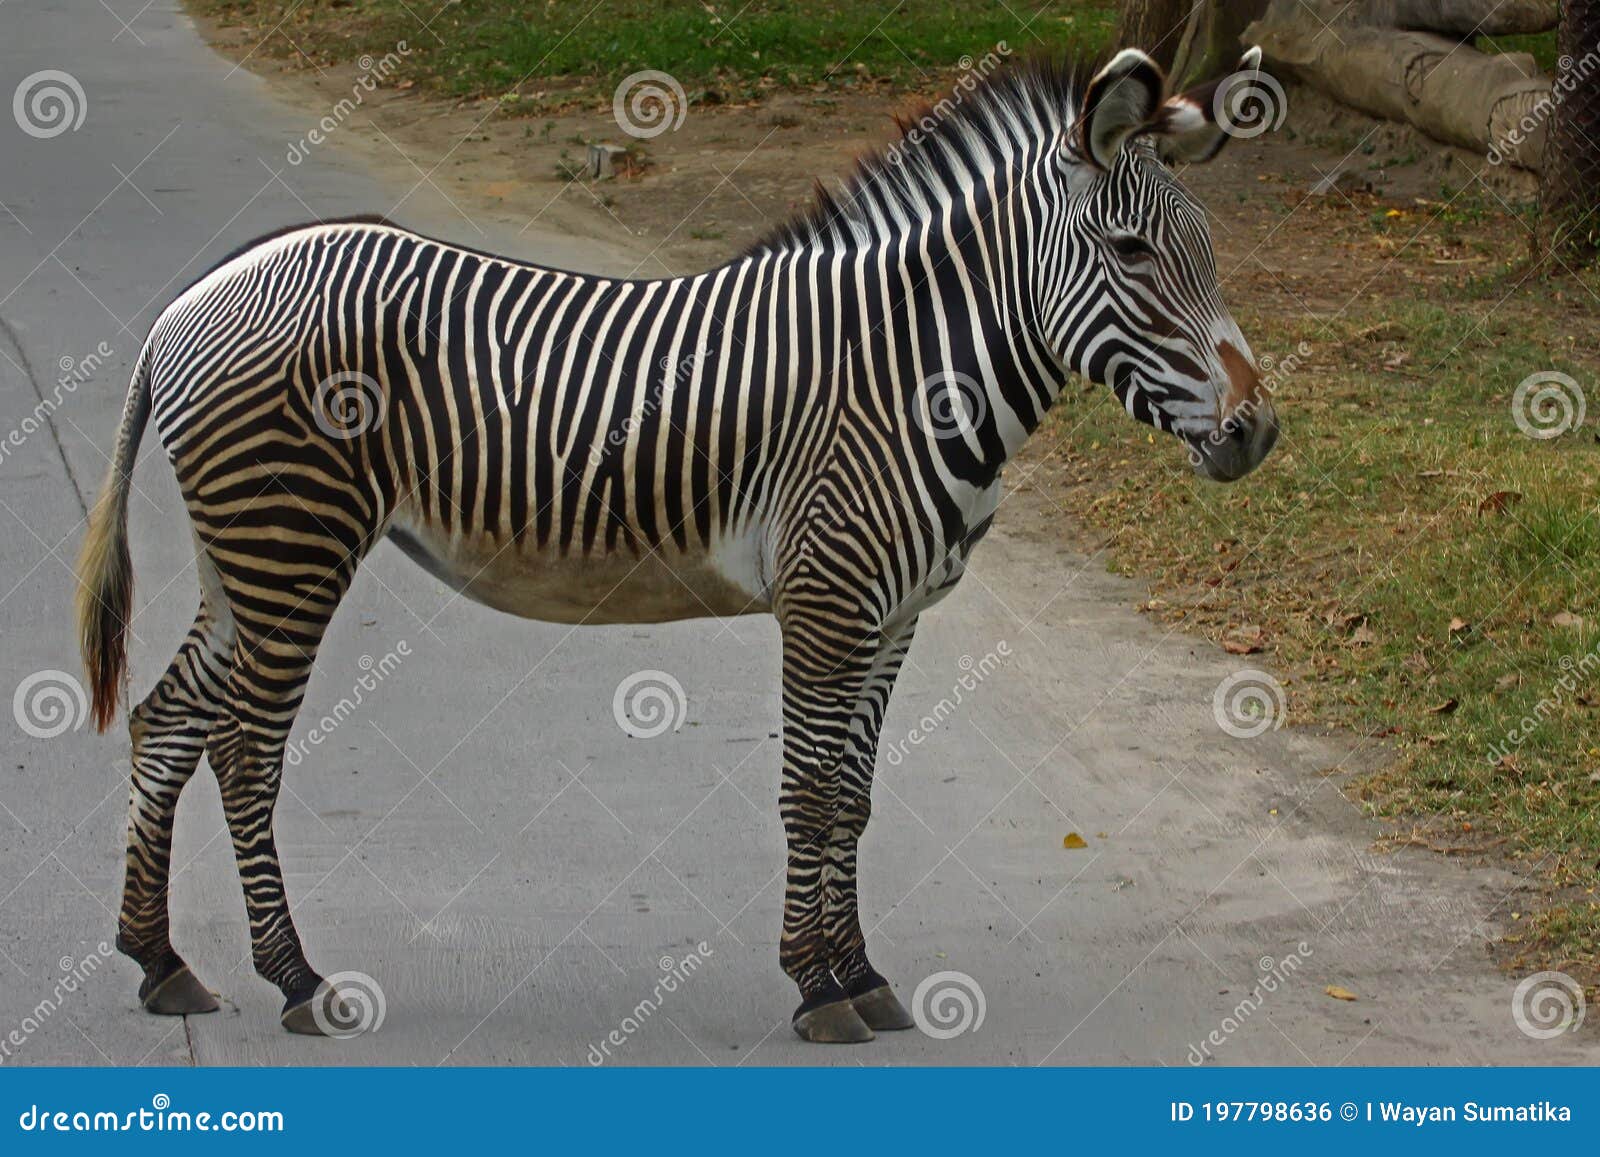 The Appearance of a Gallant Zebra. Stock Photo - Image of field, animal:  197798636